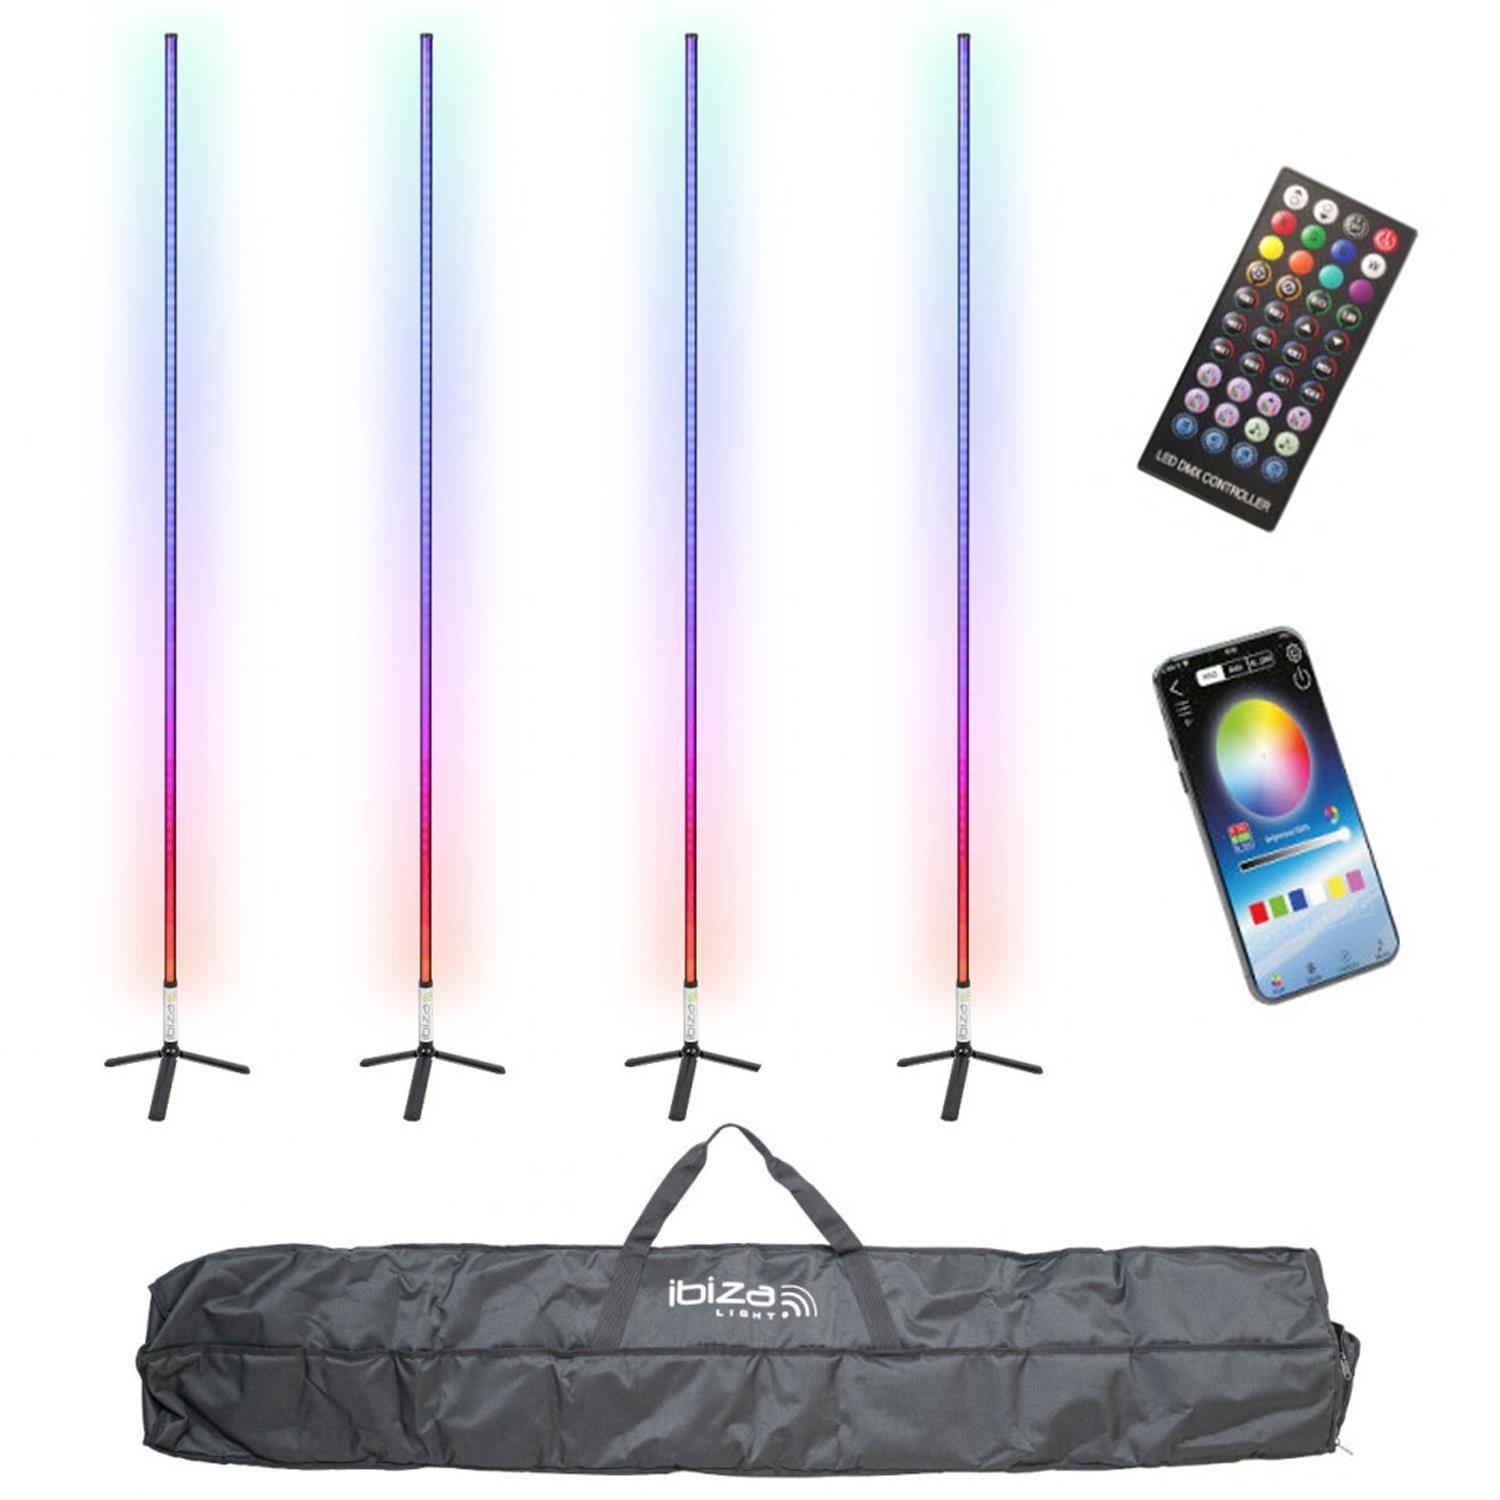 4 x Ibiza 1.8m LED Magic Color Visual Stick with App,Remote and Carry Bag - DY Pro Audio